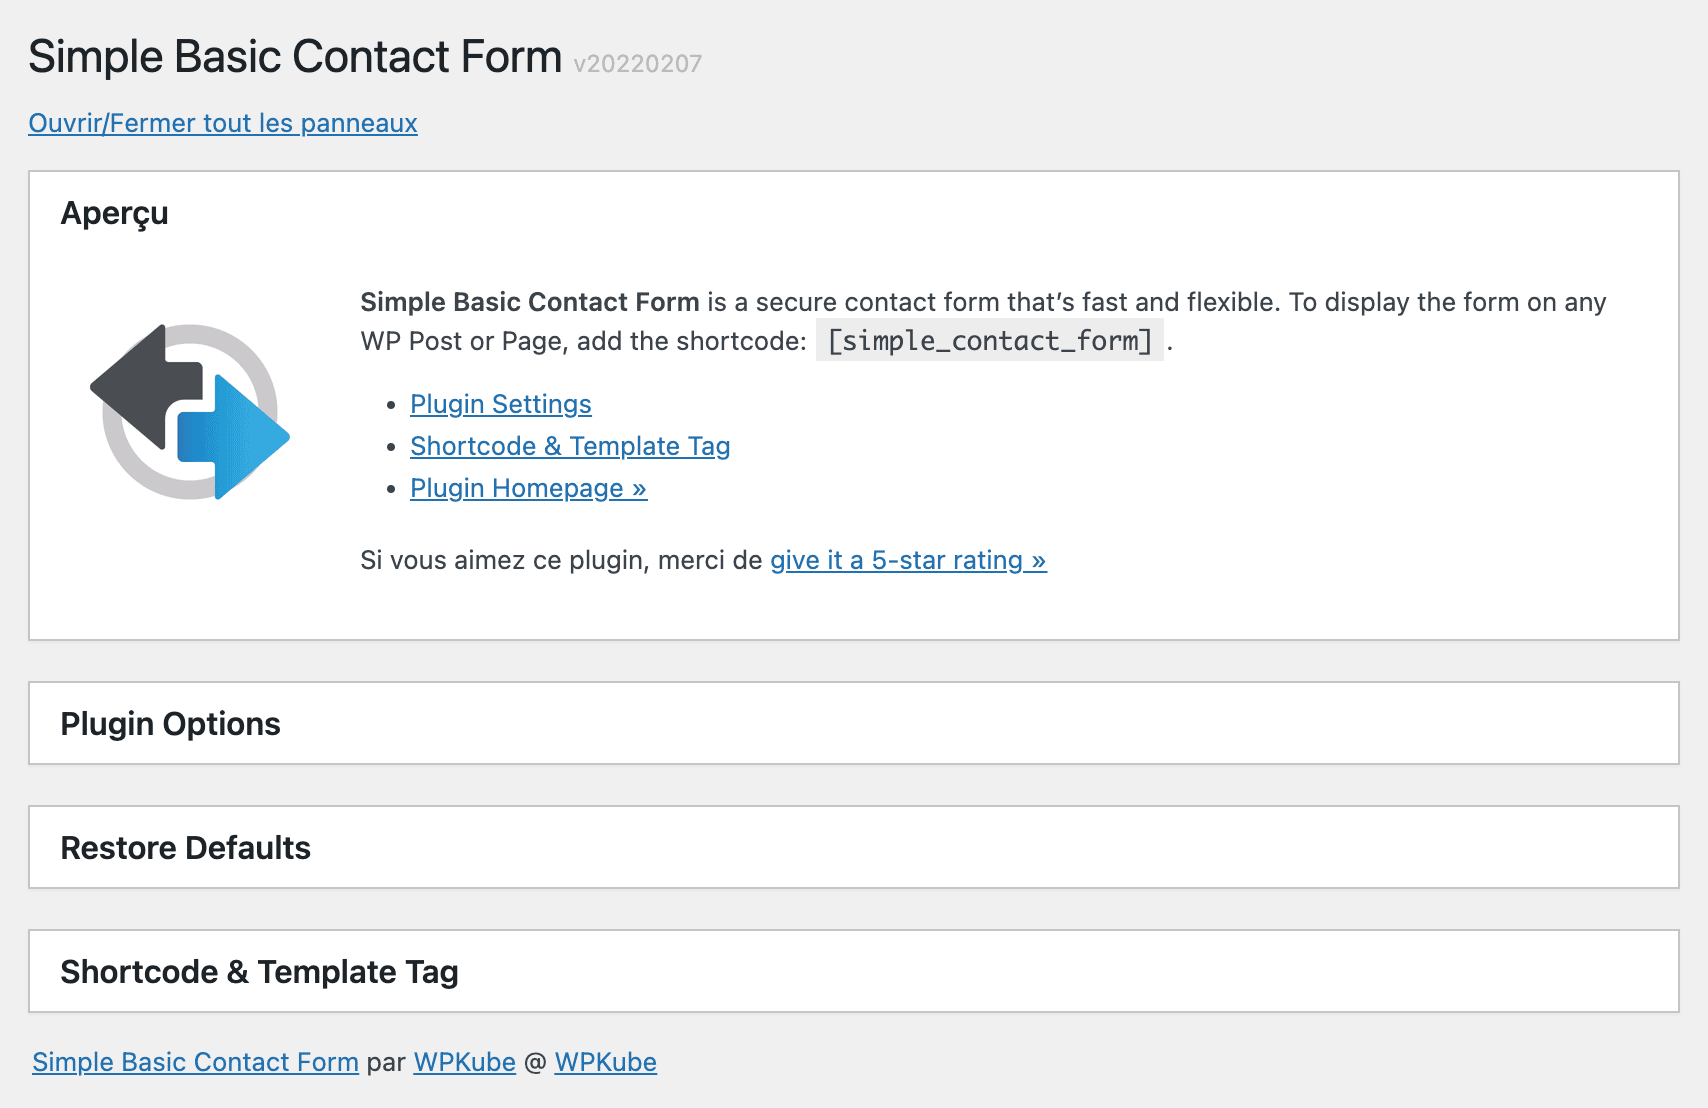 Simple Basic Contact Form settings.